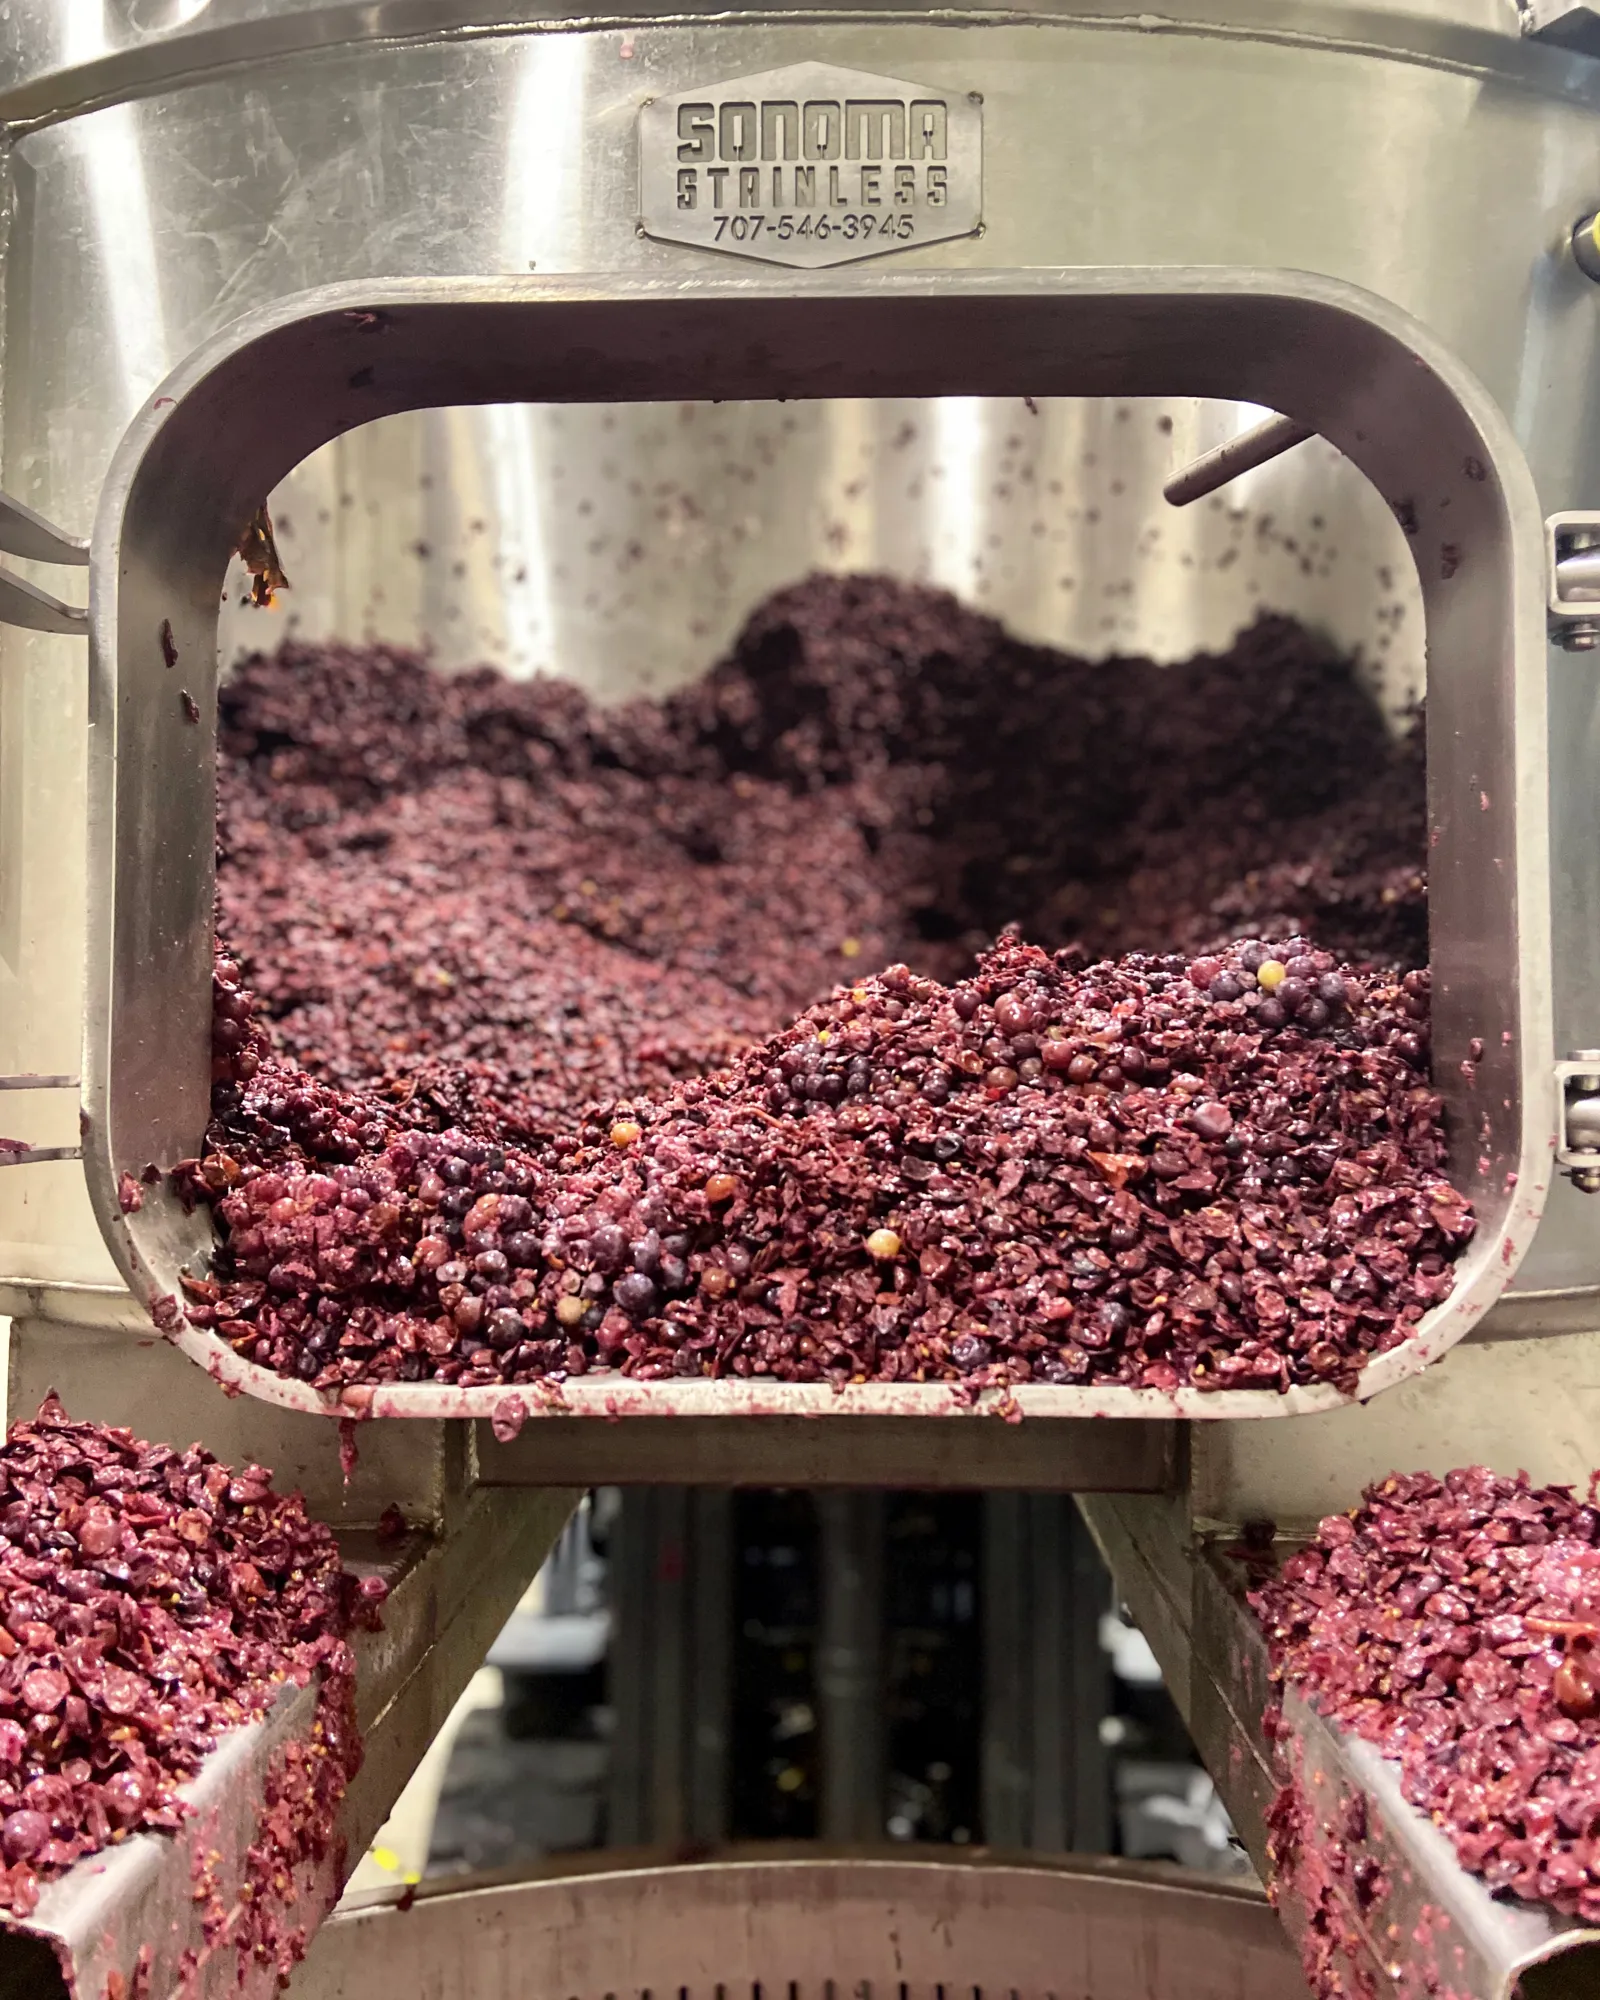 Red wine grape skins after fermentation and pressing for wine production at Sugarloaf Wine Co.